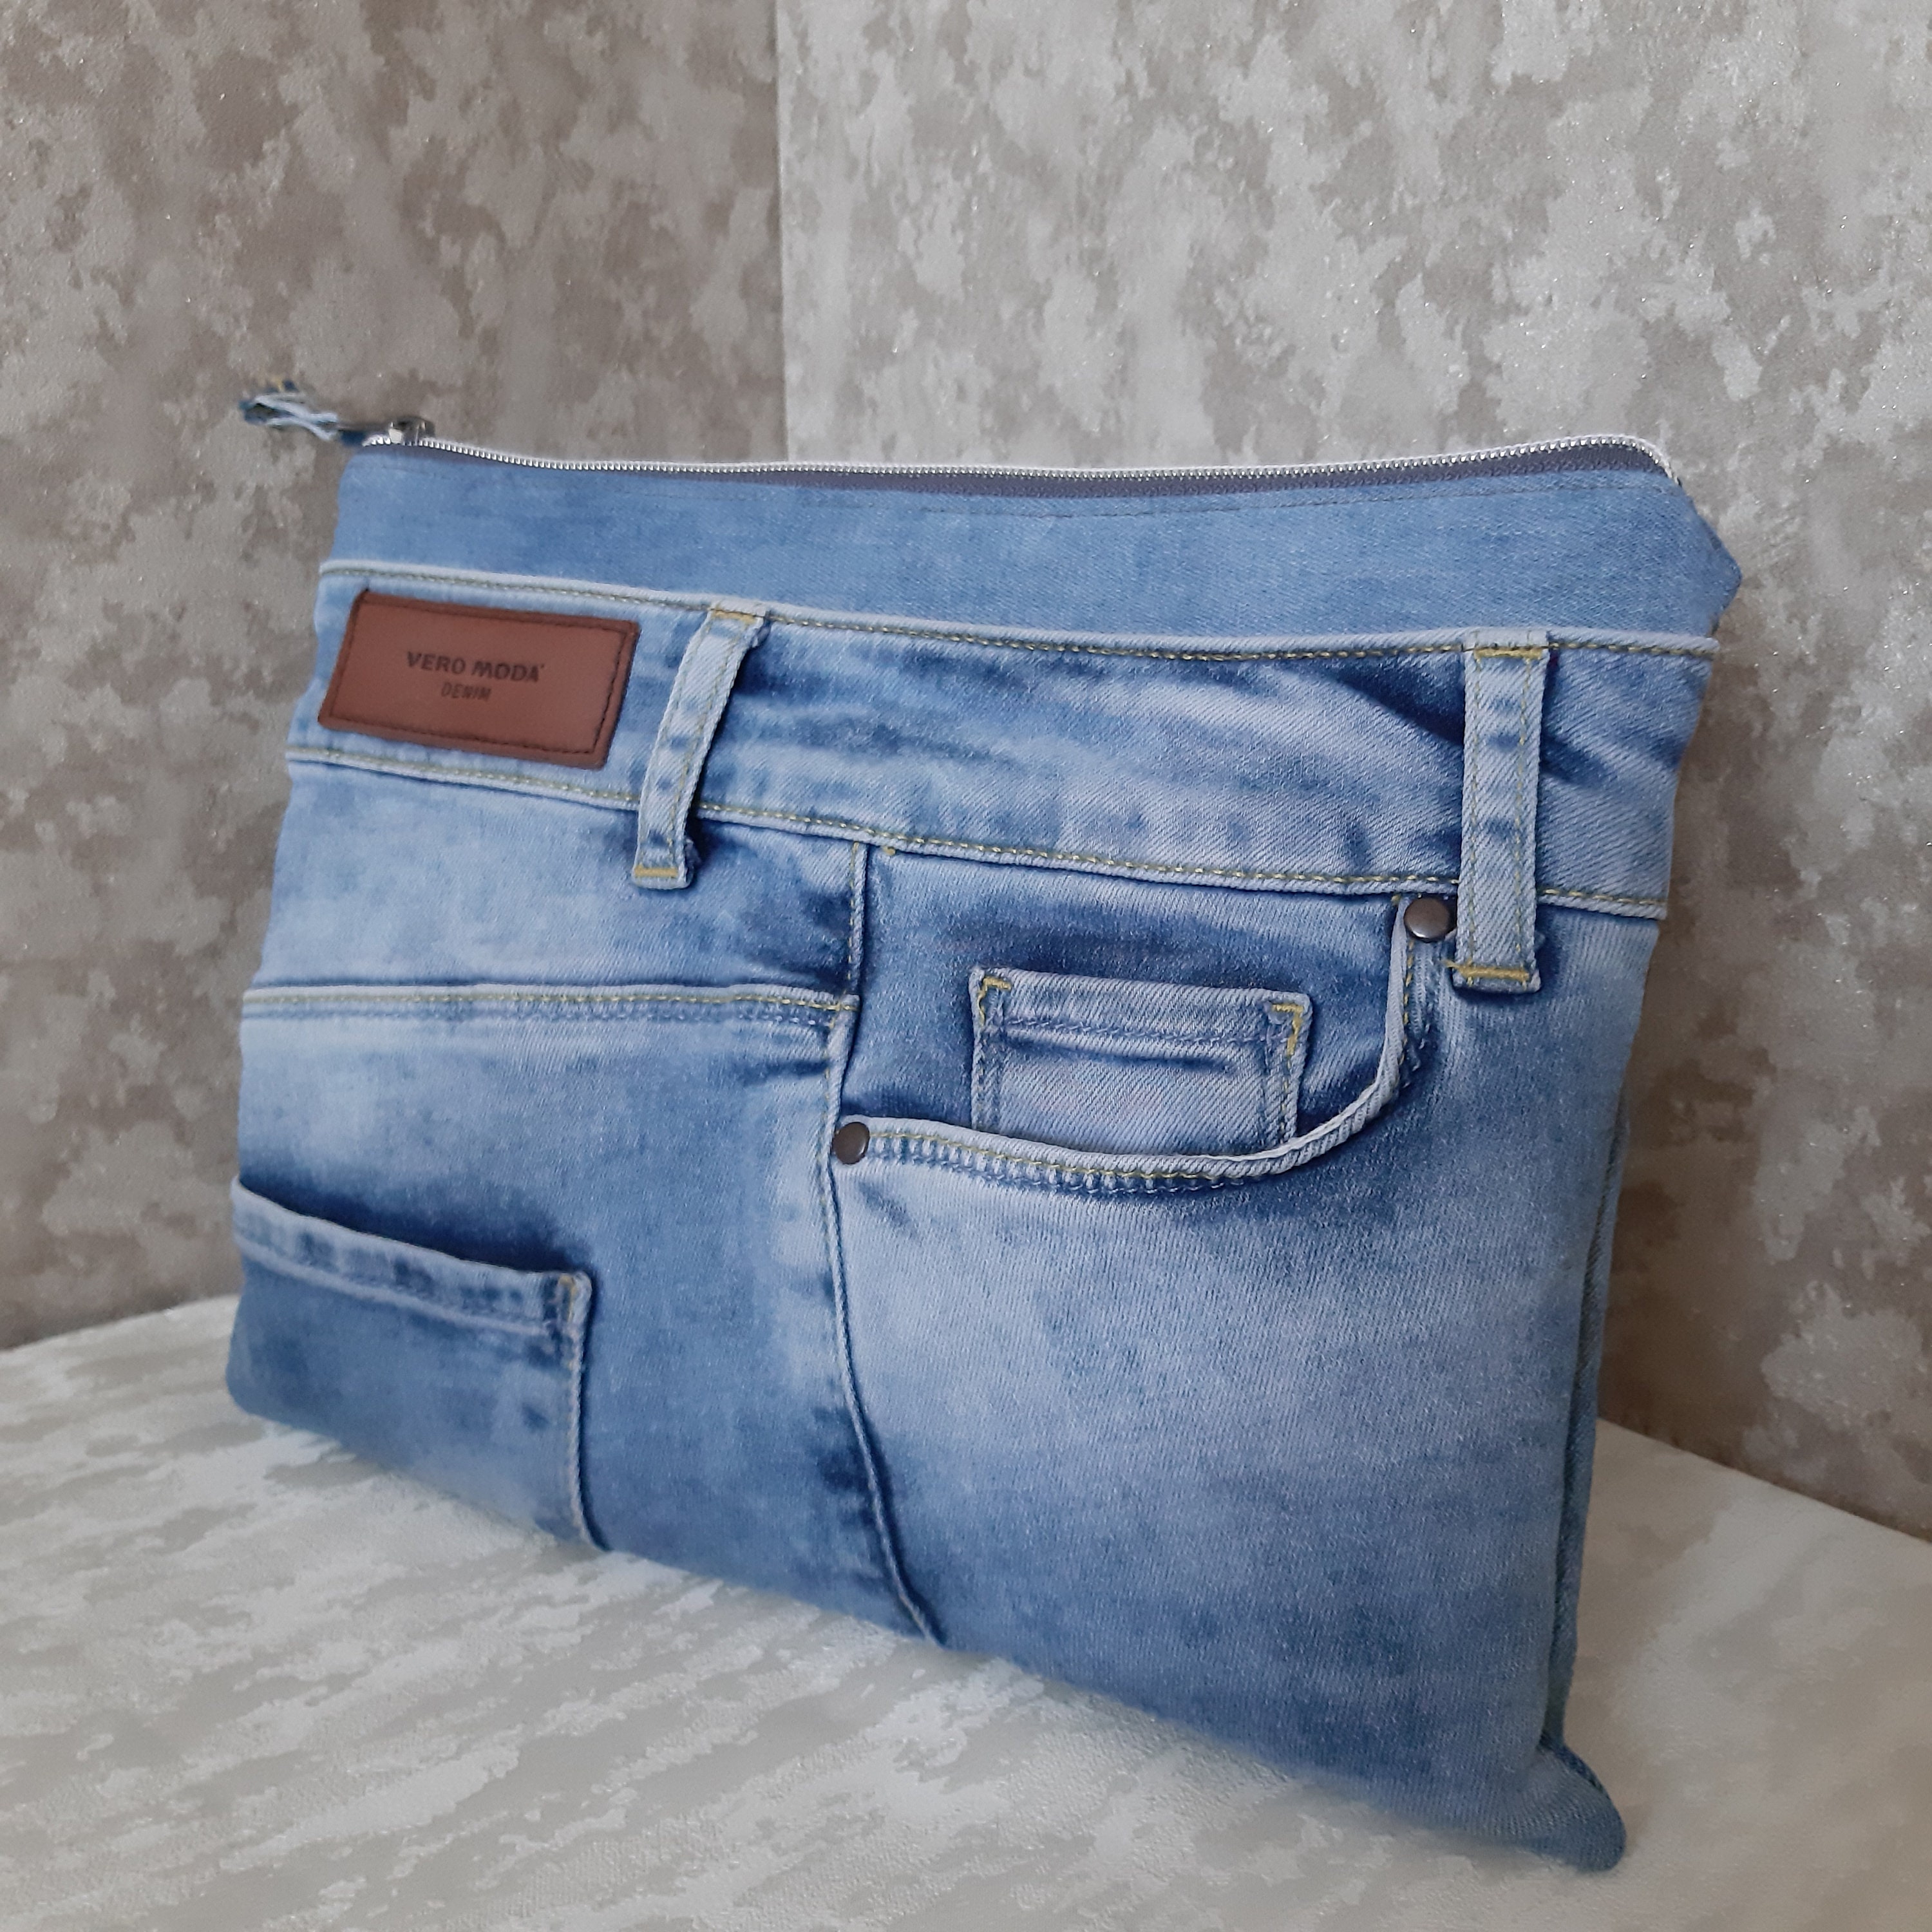 Blue Denim Clutch Bag Casual Clutch Bag of Recycled Jeans - Etsy